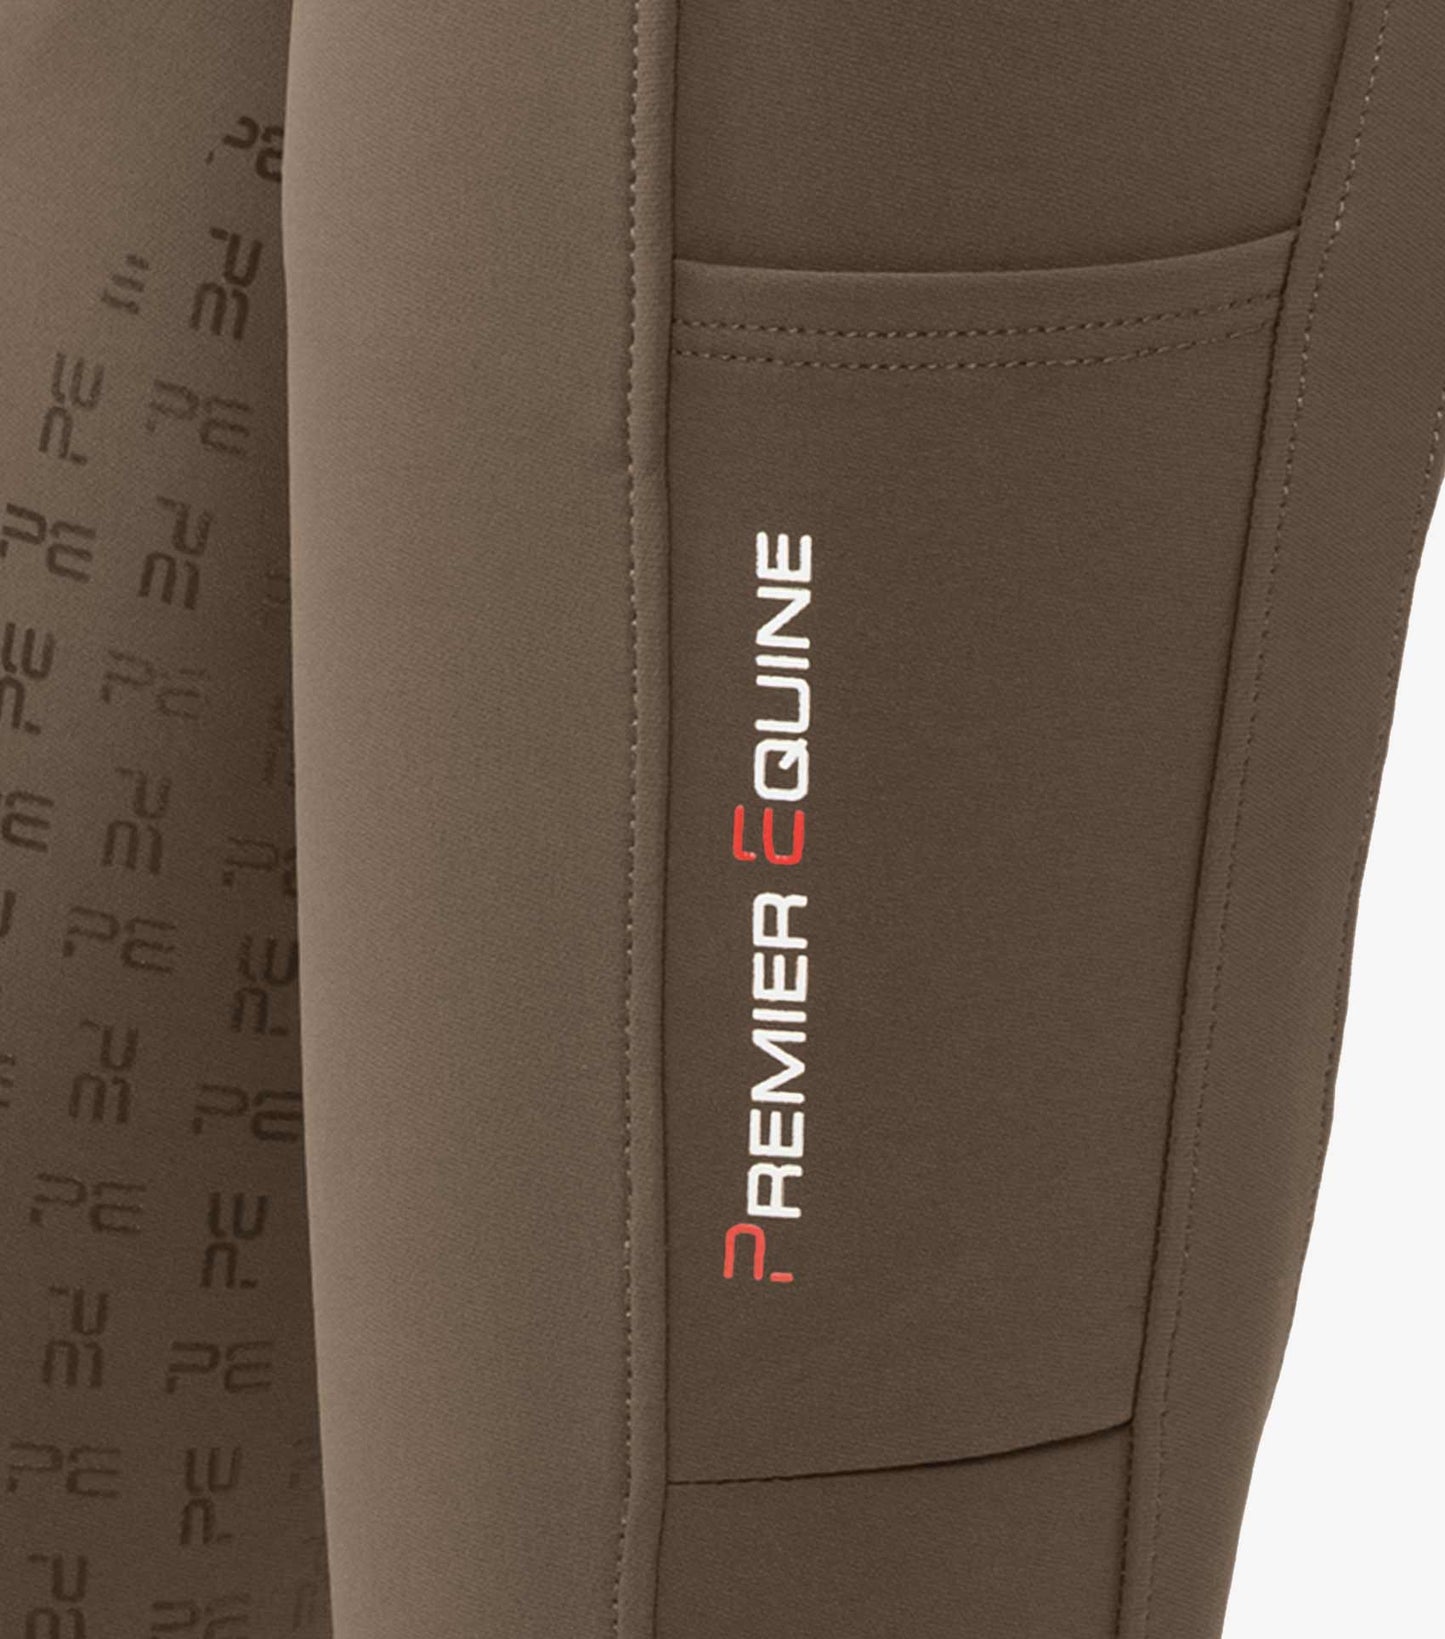 Premier Equine Coco II Ladies Gel Full Seat Riding Breeches, high waisted - Walnut